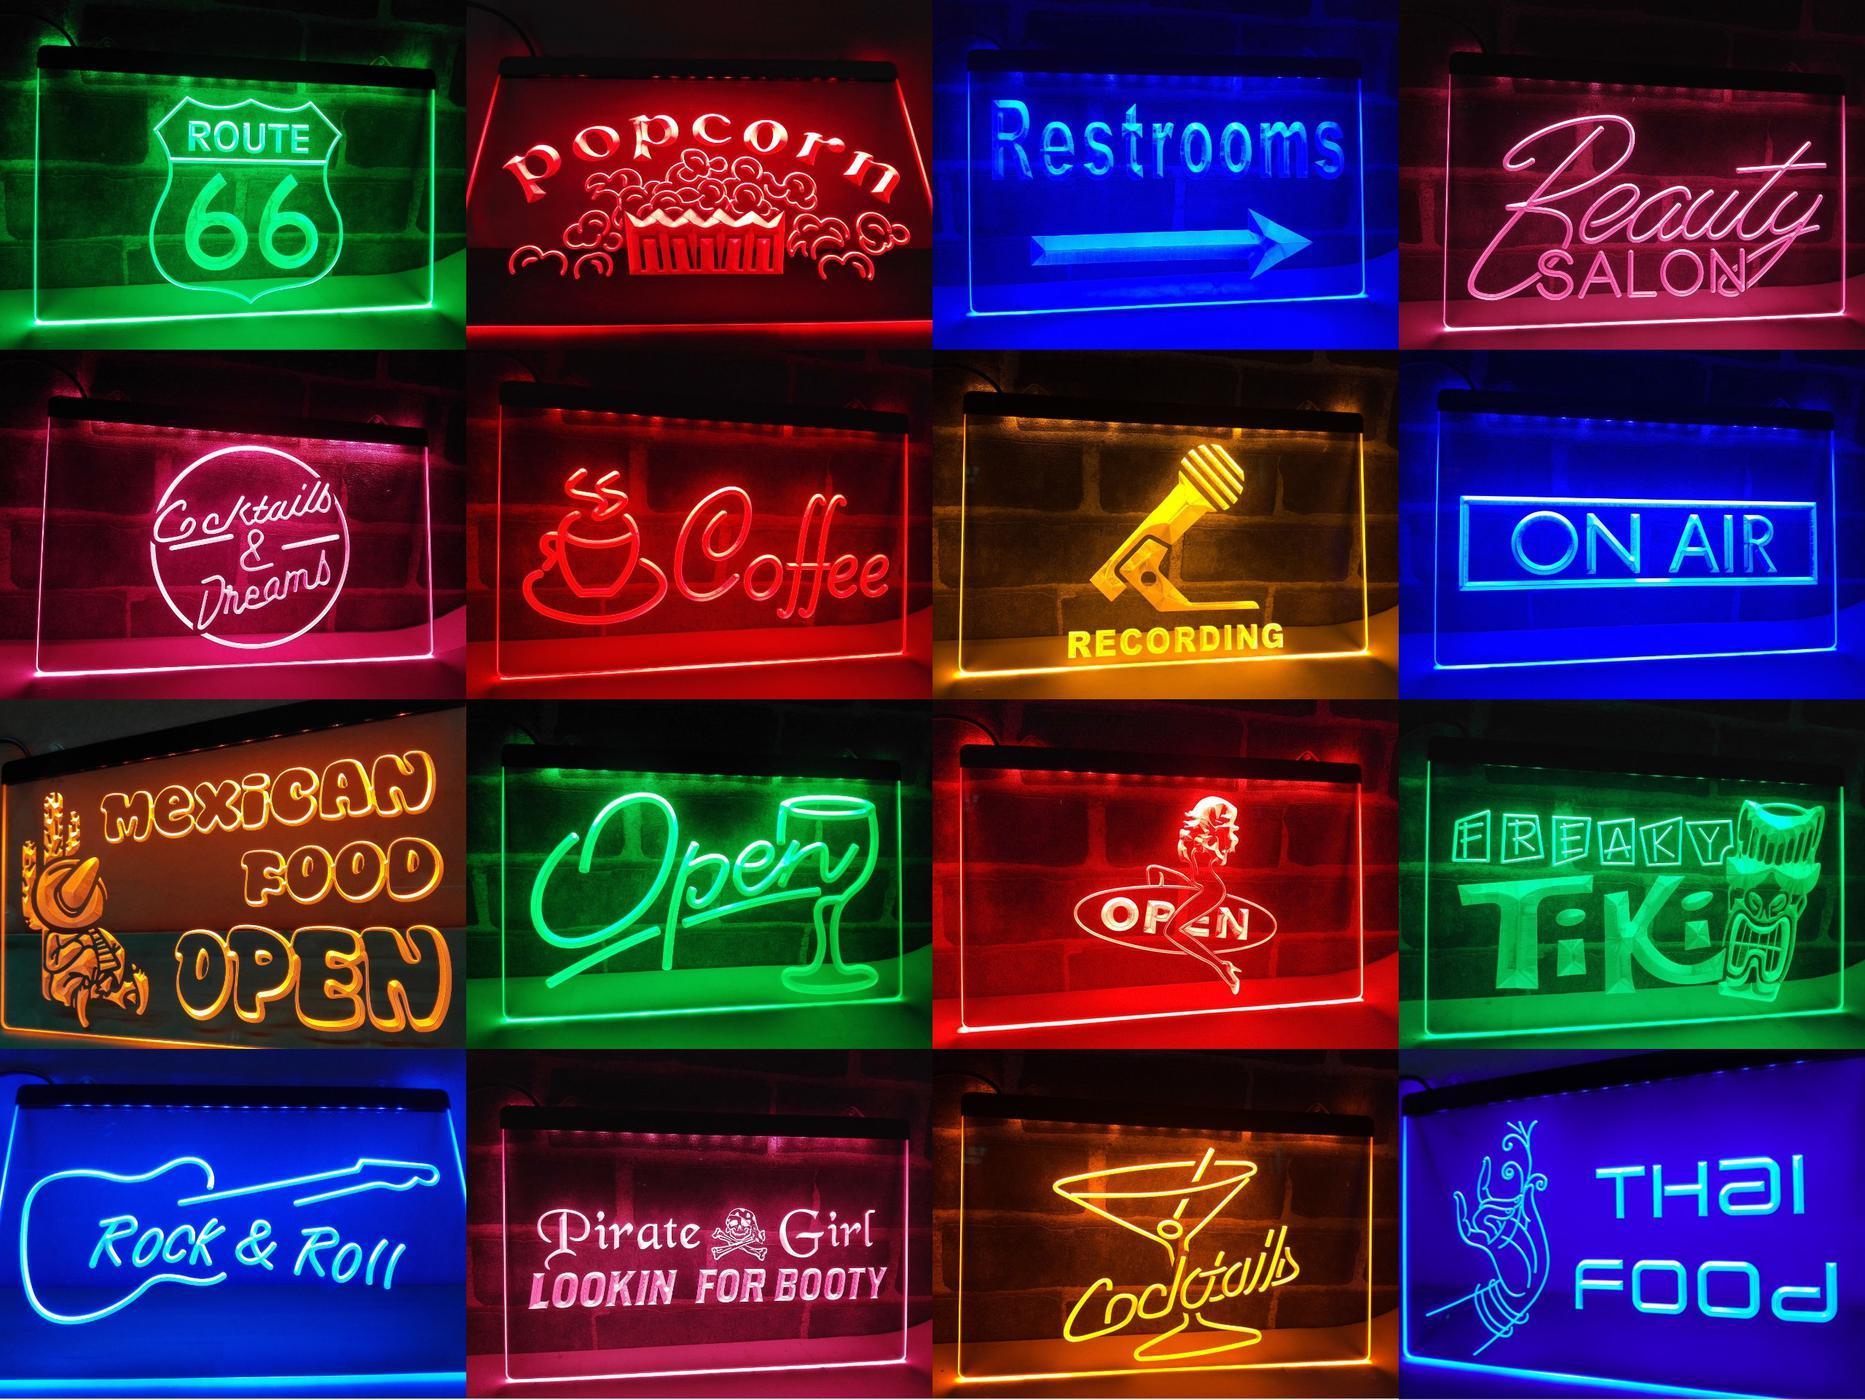 Certified Auto Repair Shop LED Neon Light Sign - Way Up Gifts